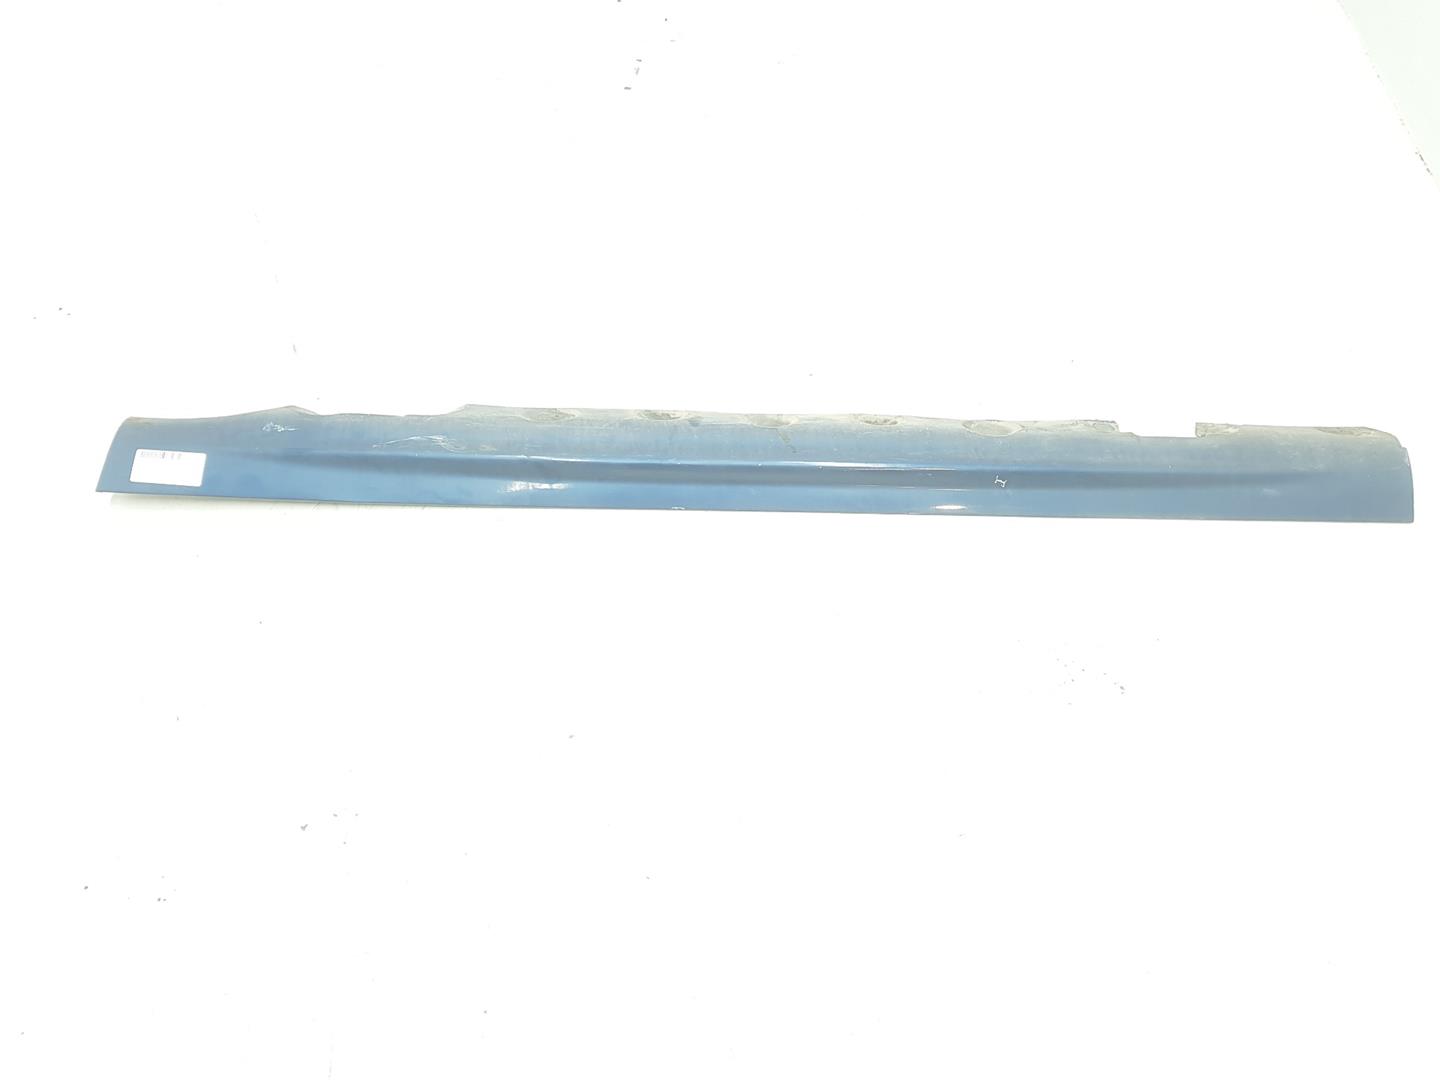 BMW 3 Series E46 (1997-2006) Other Body Parts 51718226121, 51718226121, COLORAZUL364 19869817